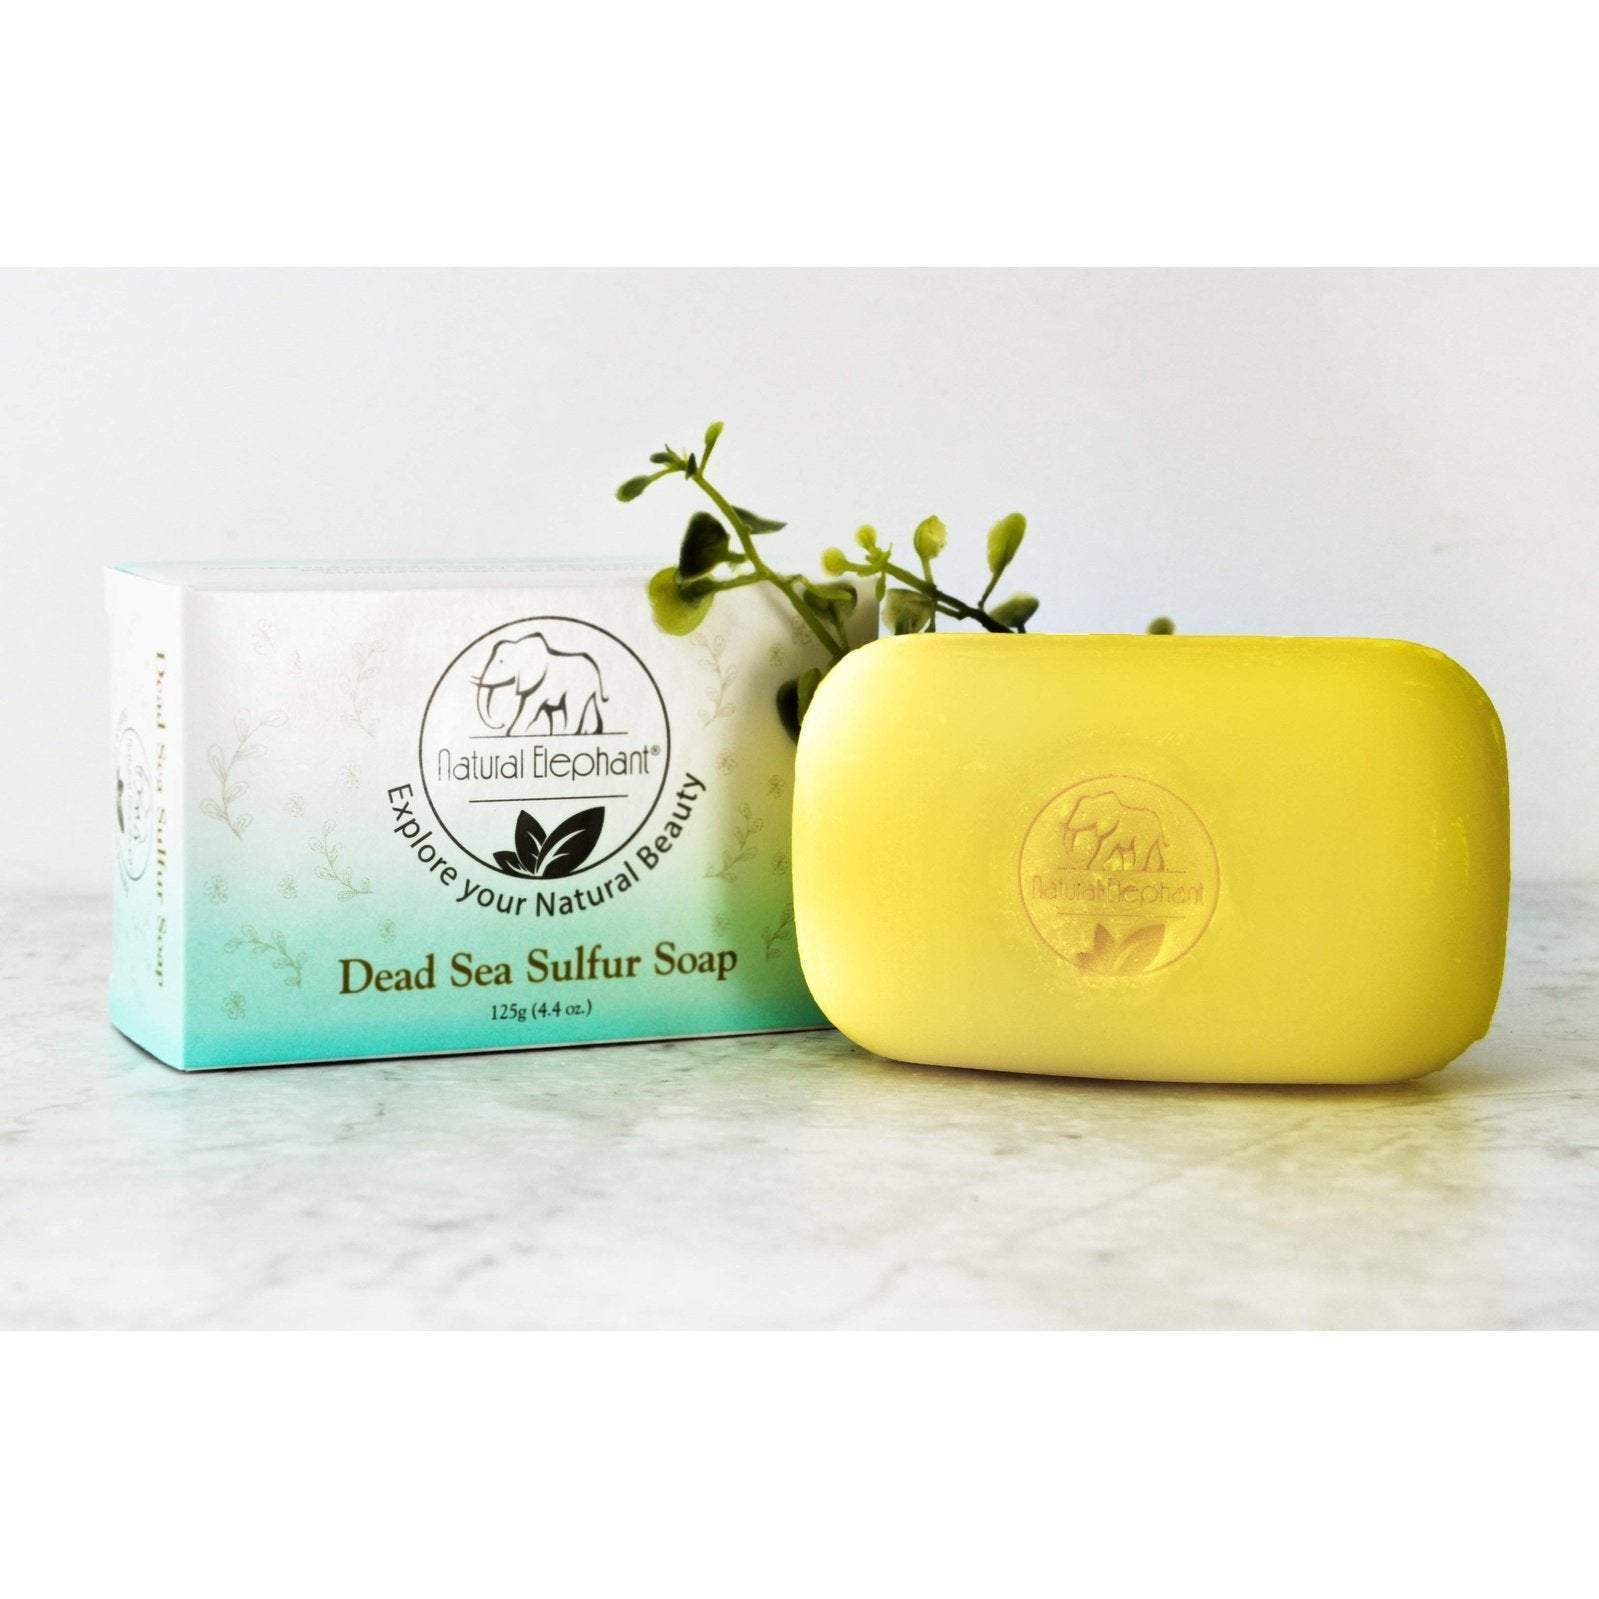 Natural Elephant Dead Sea Sulfur Soap 4.4 oz (125 g)-Natural Elephant-BB_Bath and Shower,BB_Soap Bars,Brand_Natural Elephant,Collection_Bath and Body,Collection_Skincare,Concern_Acne & Blemishes,Concern_Combination Skin,Concern_Dark Spots,Concern_Large Pores,Concern_Oily Skin,Concern_Redness,Concern_Sensitive Skin,FABS_Friday2022,NATURAL_Dead Sea Collection,Skincare_Cleansers